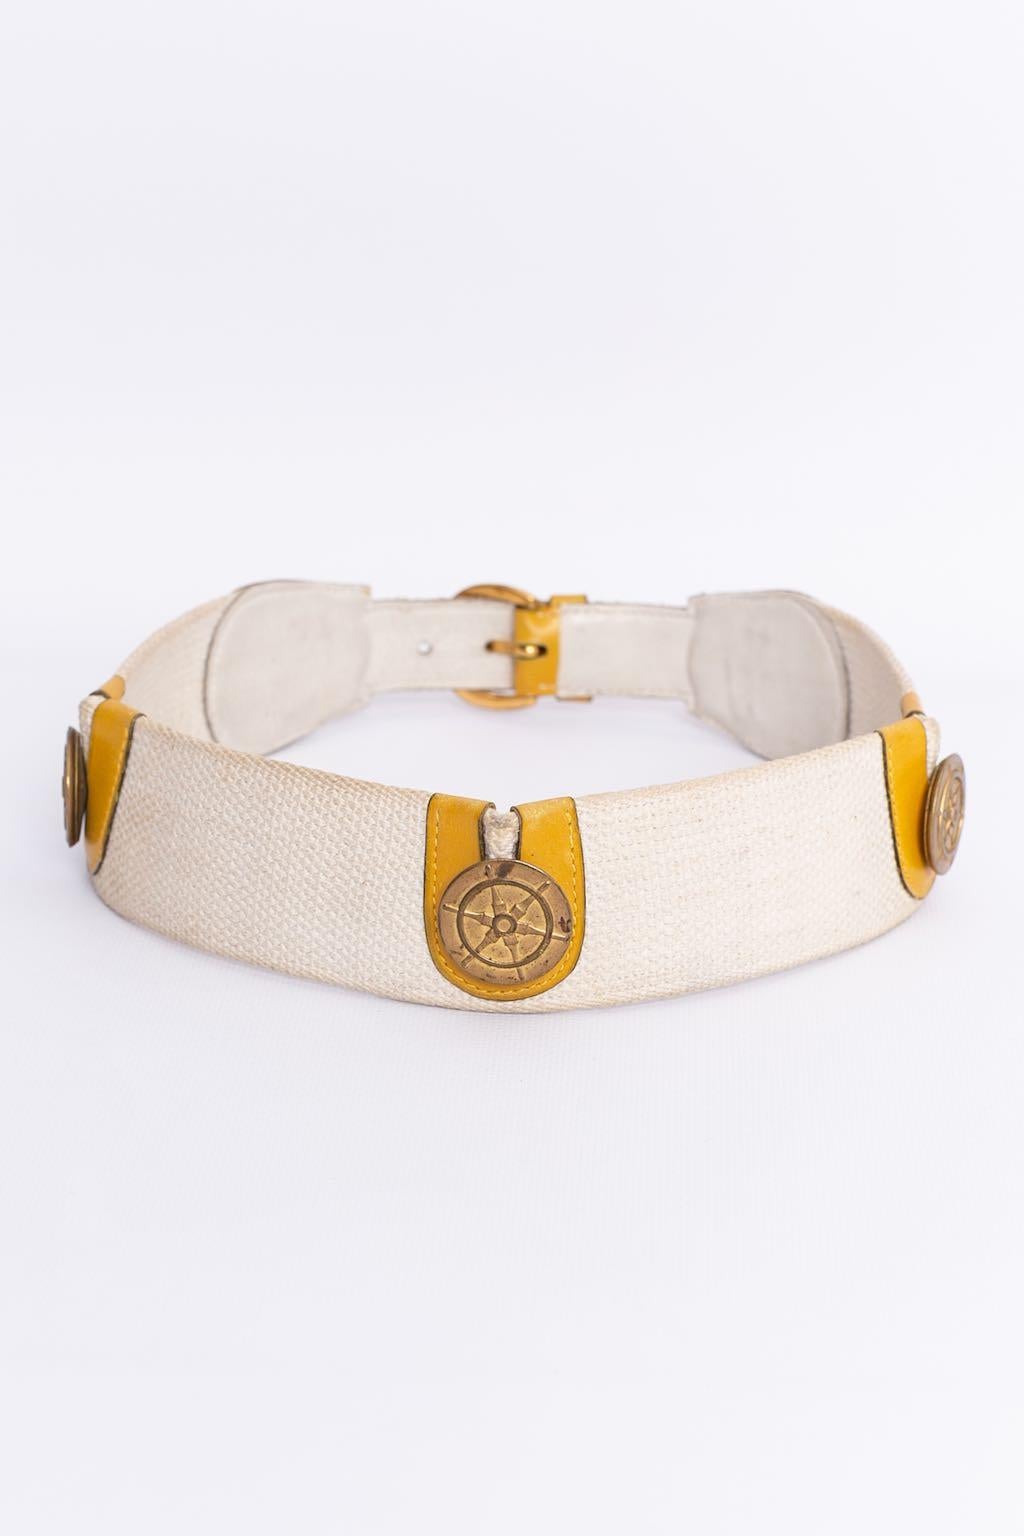 Hermes Paris Canvas Belt in Yellow Leather, Adorned with Gilted Metal Elements In Fair Condition For Sale In SAINT-OUEN-SUR-SEINE, FR